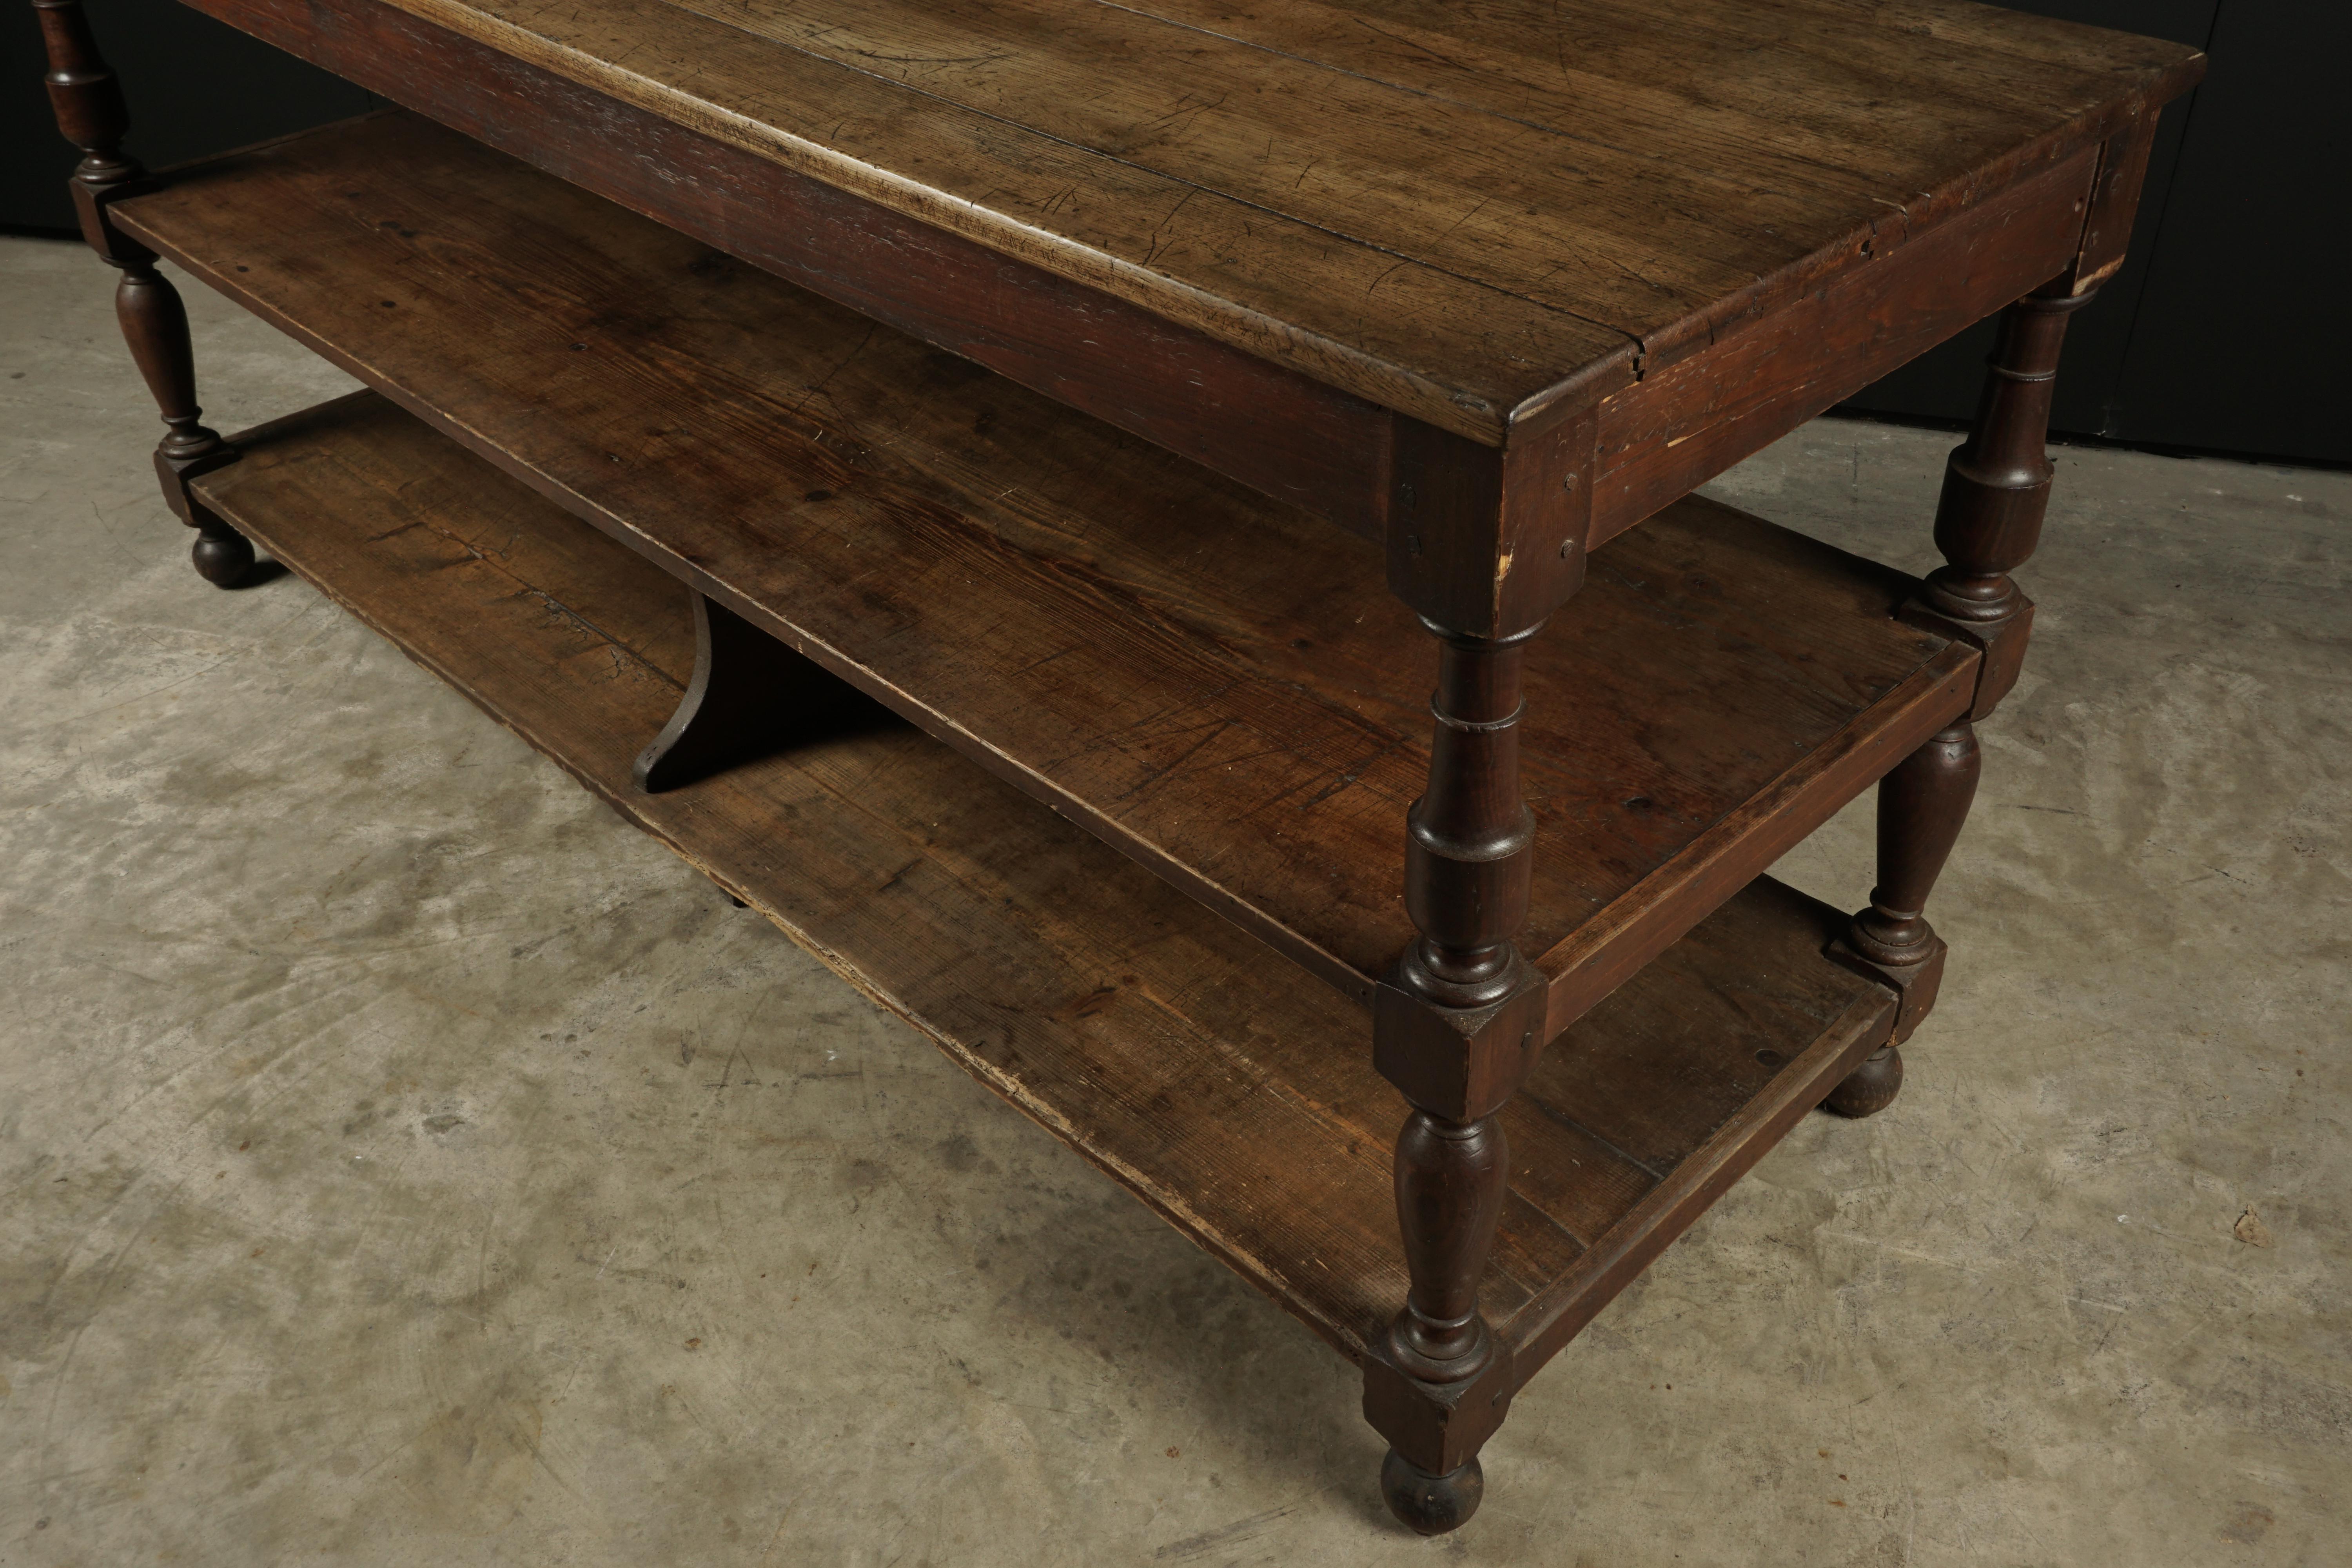 European Early Draper Table from France, circa 1890